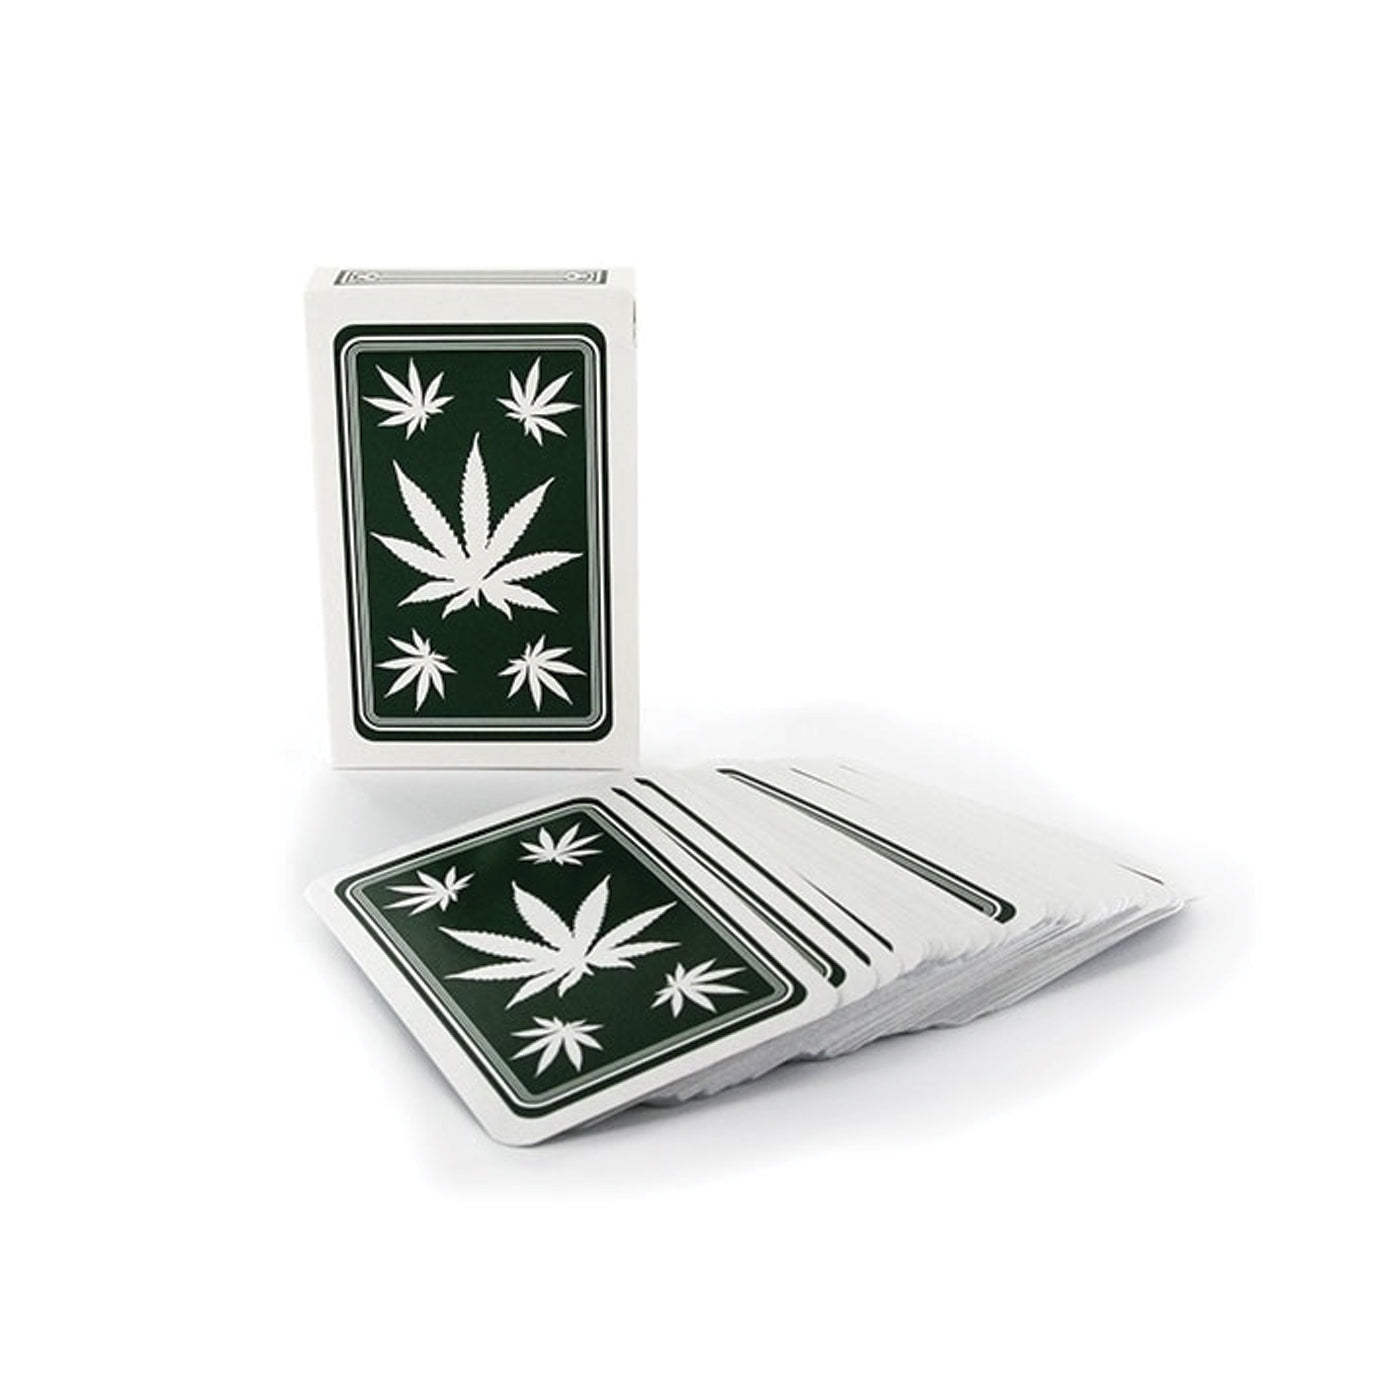 Herb Leaf Playing Cards